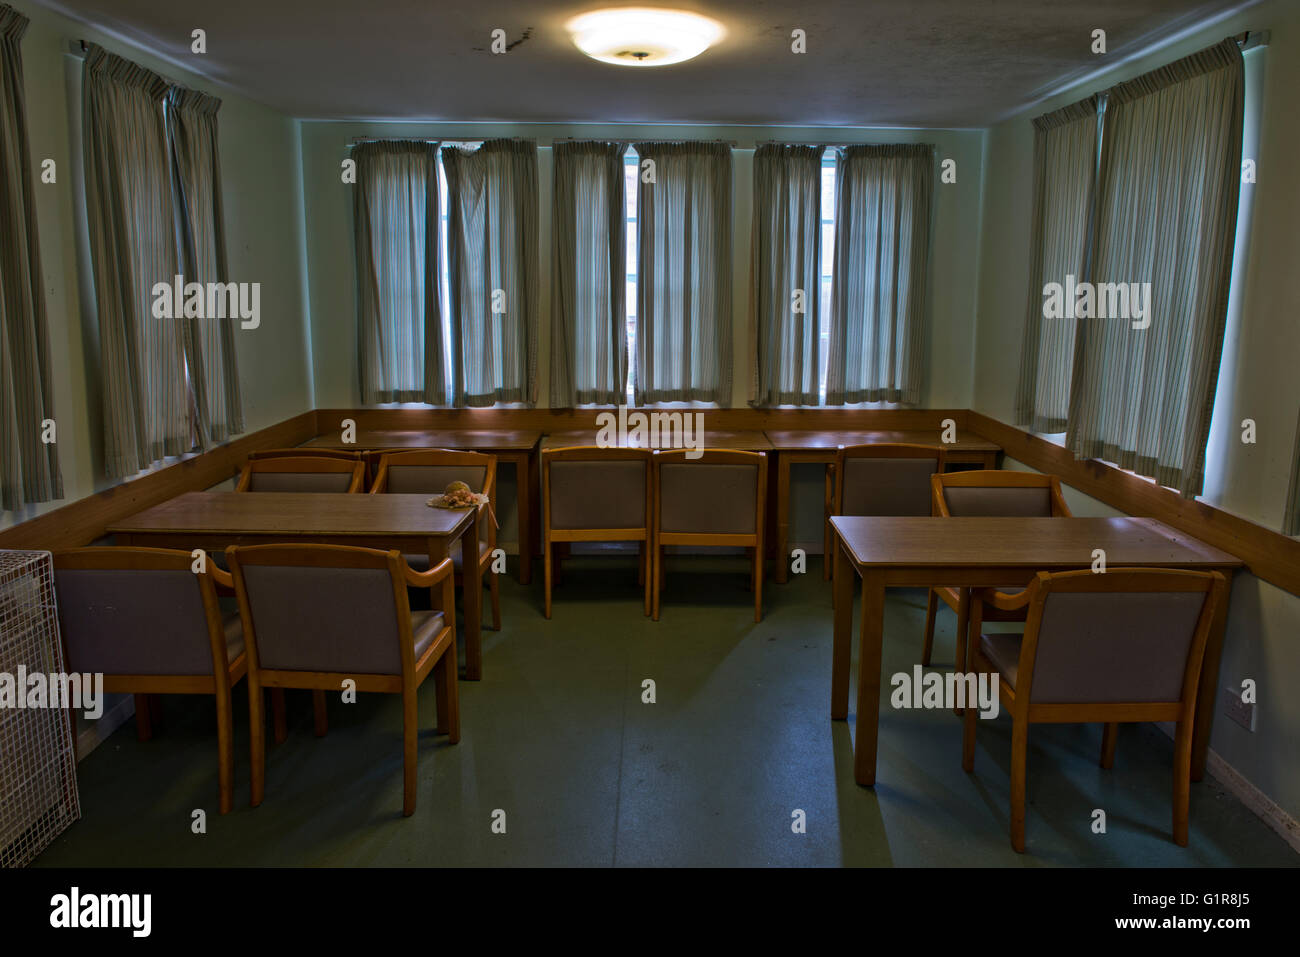 Lighting still works in the dining room at Linford Park Nursing Home, Hampshire, UK Stock Photo